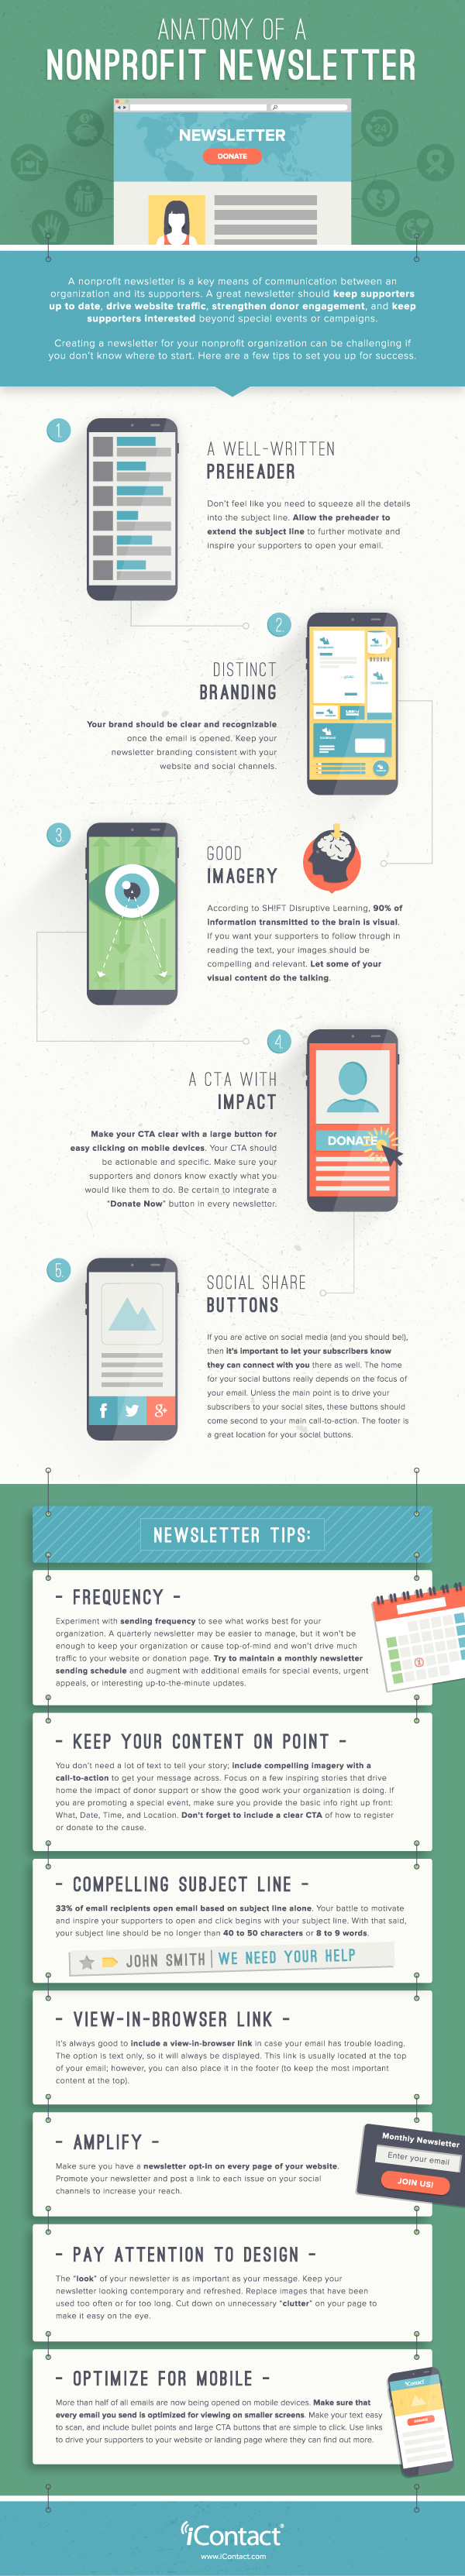 5 Steps on Building Traffic to Your Nonprofit Blog [Infographic]